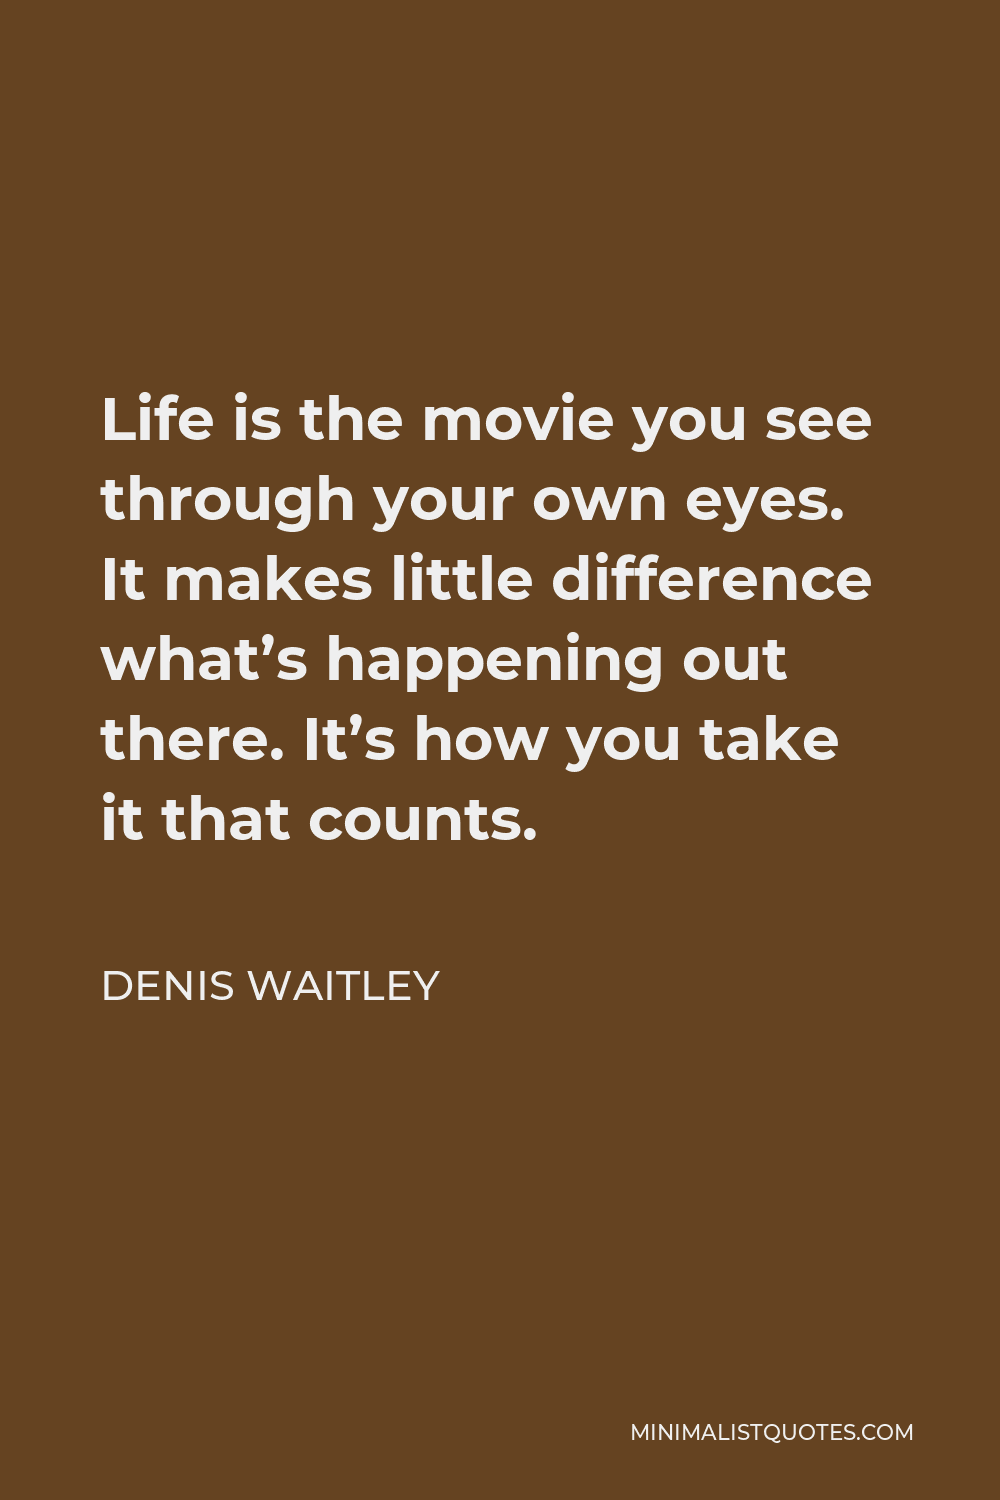 Denis Waitley Quote - Life is the movie you see through your own eyes. It makes little difference what’s happening out there. It’s how you take it that counts.